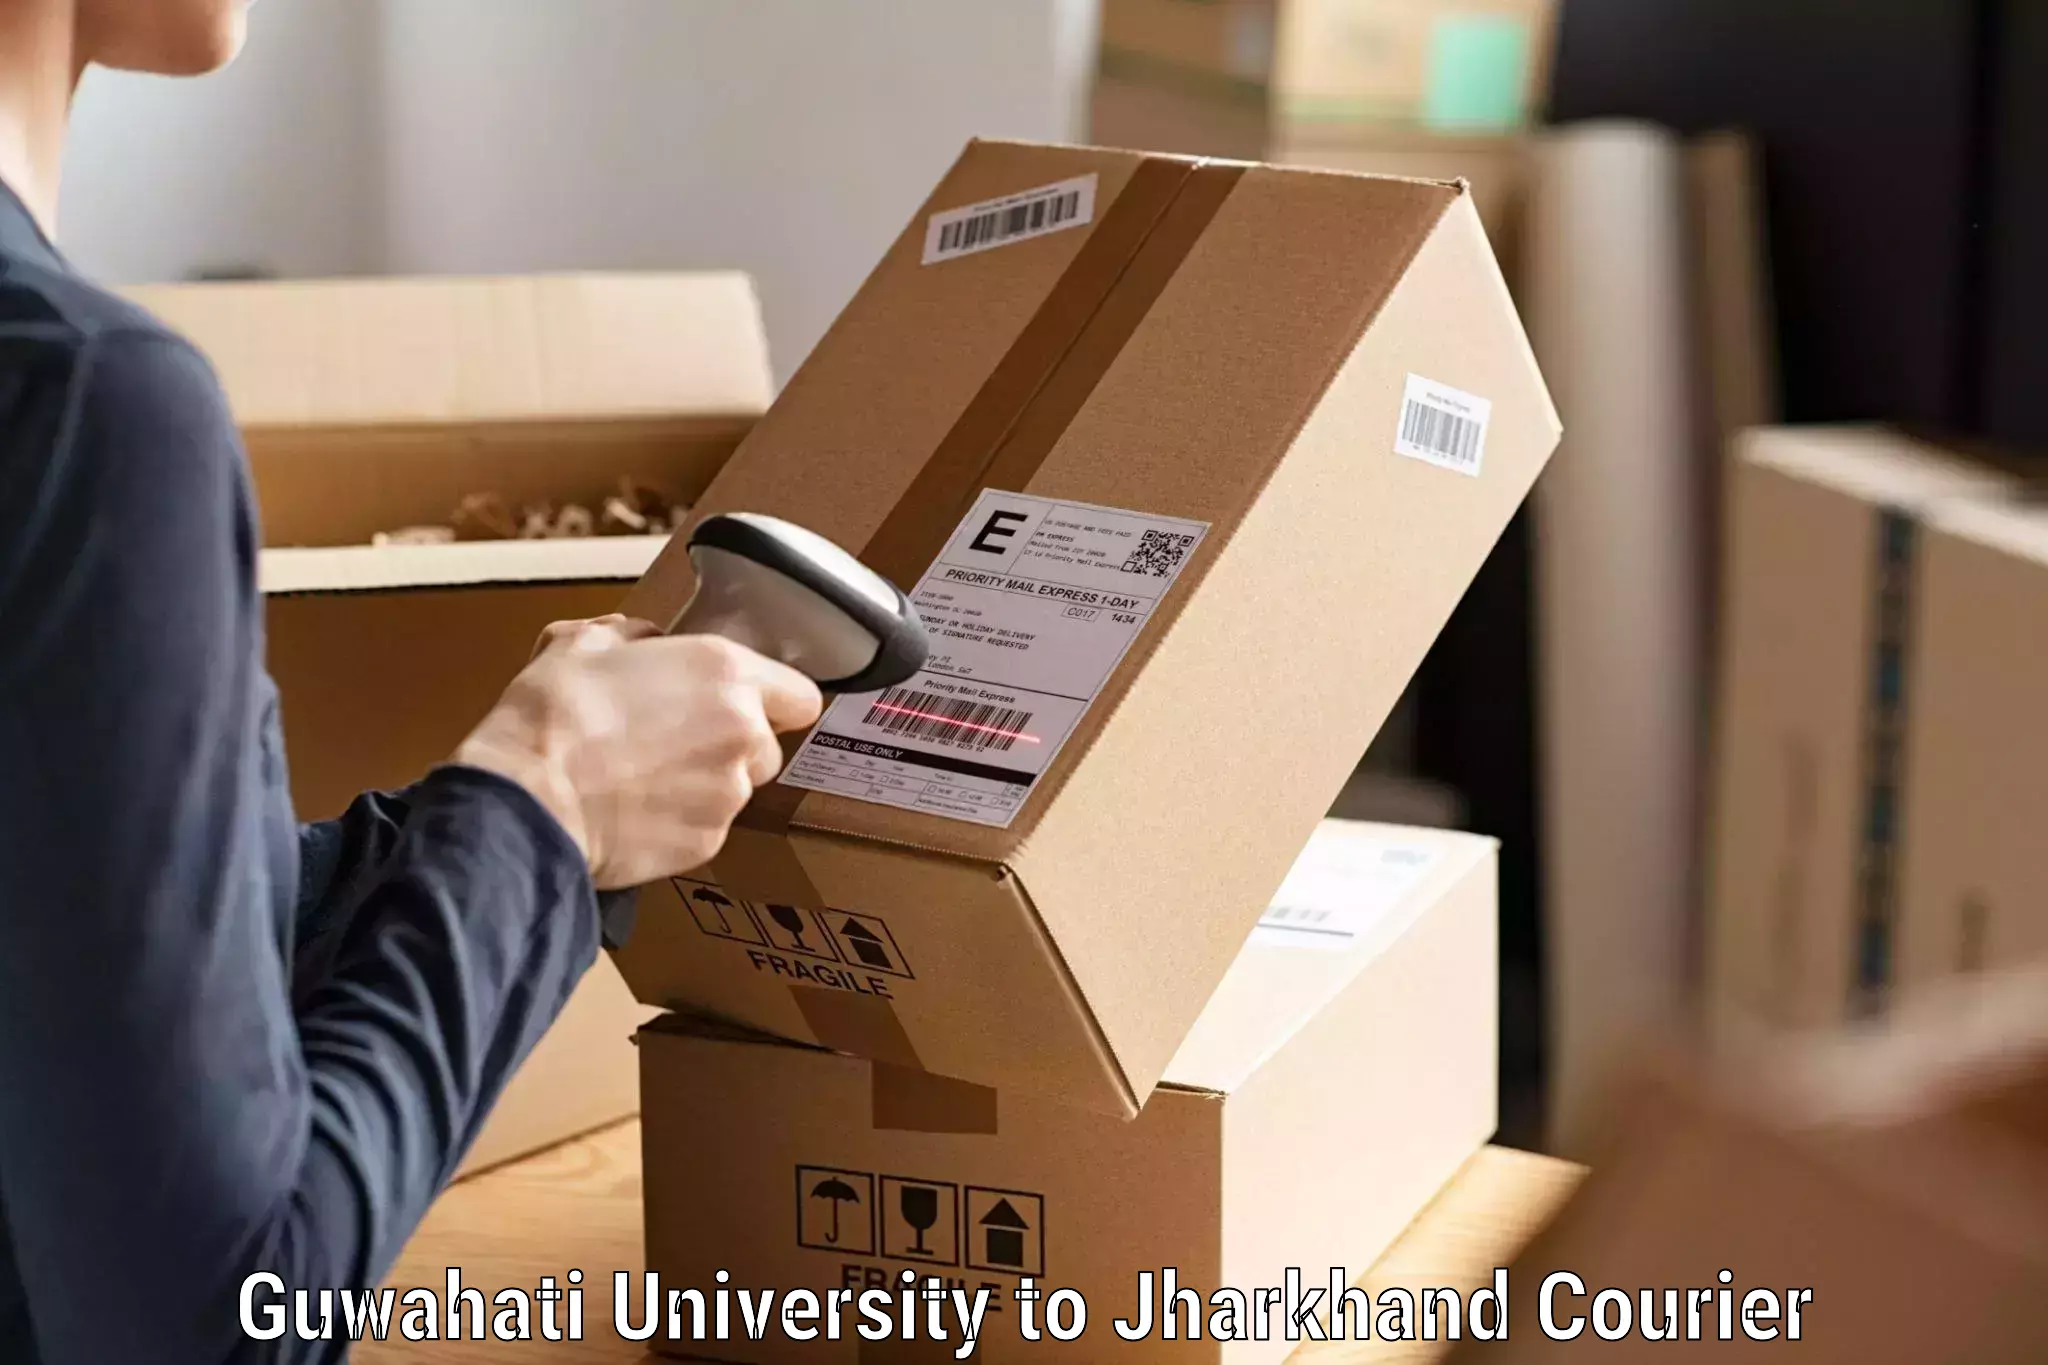 Large package courier in Guwahati University to Bokaro Steel City